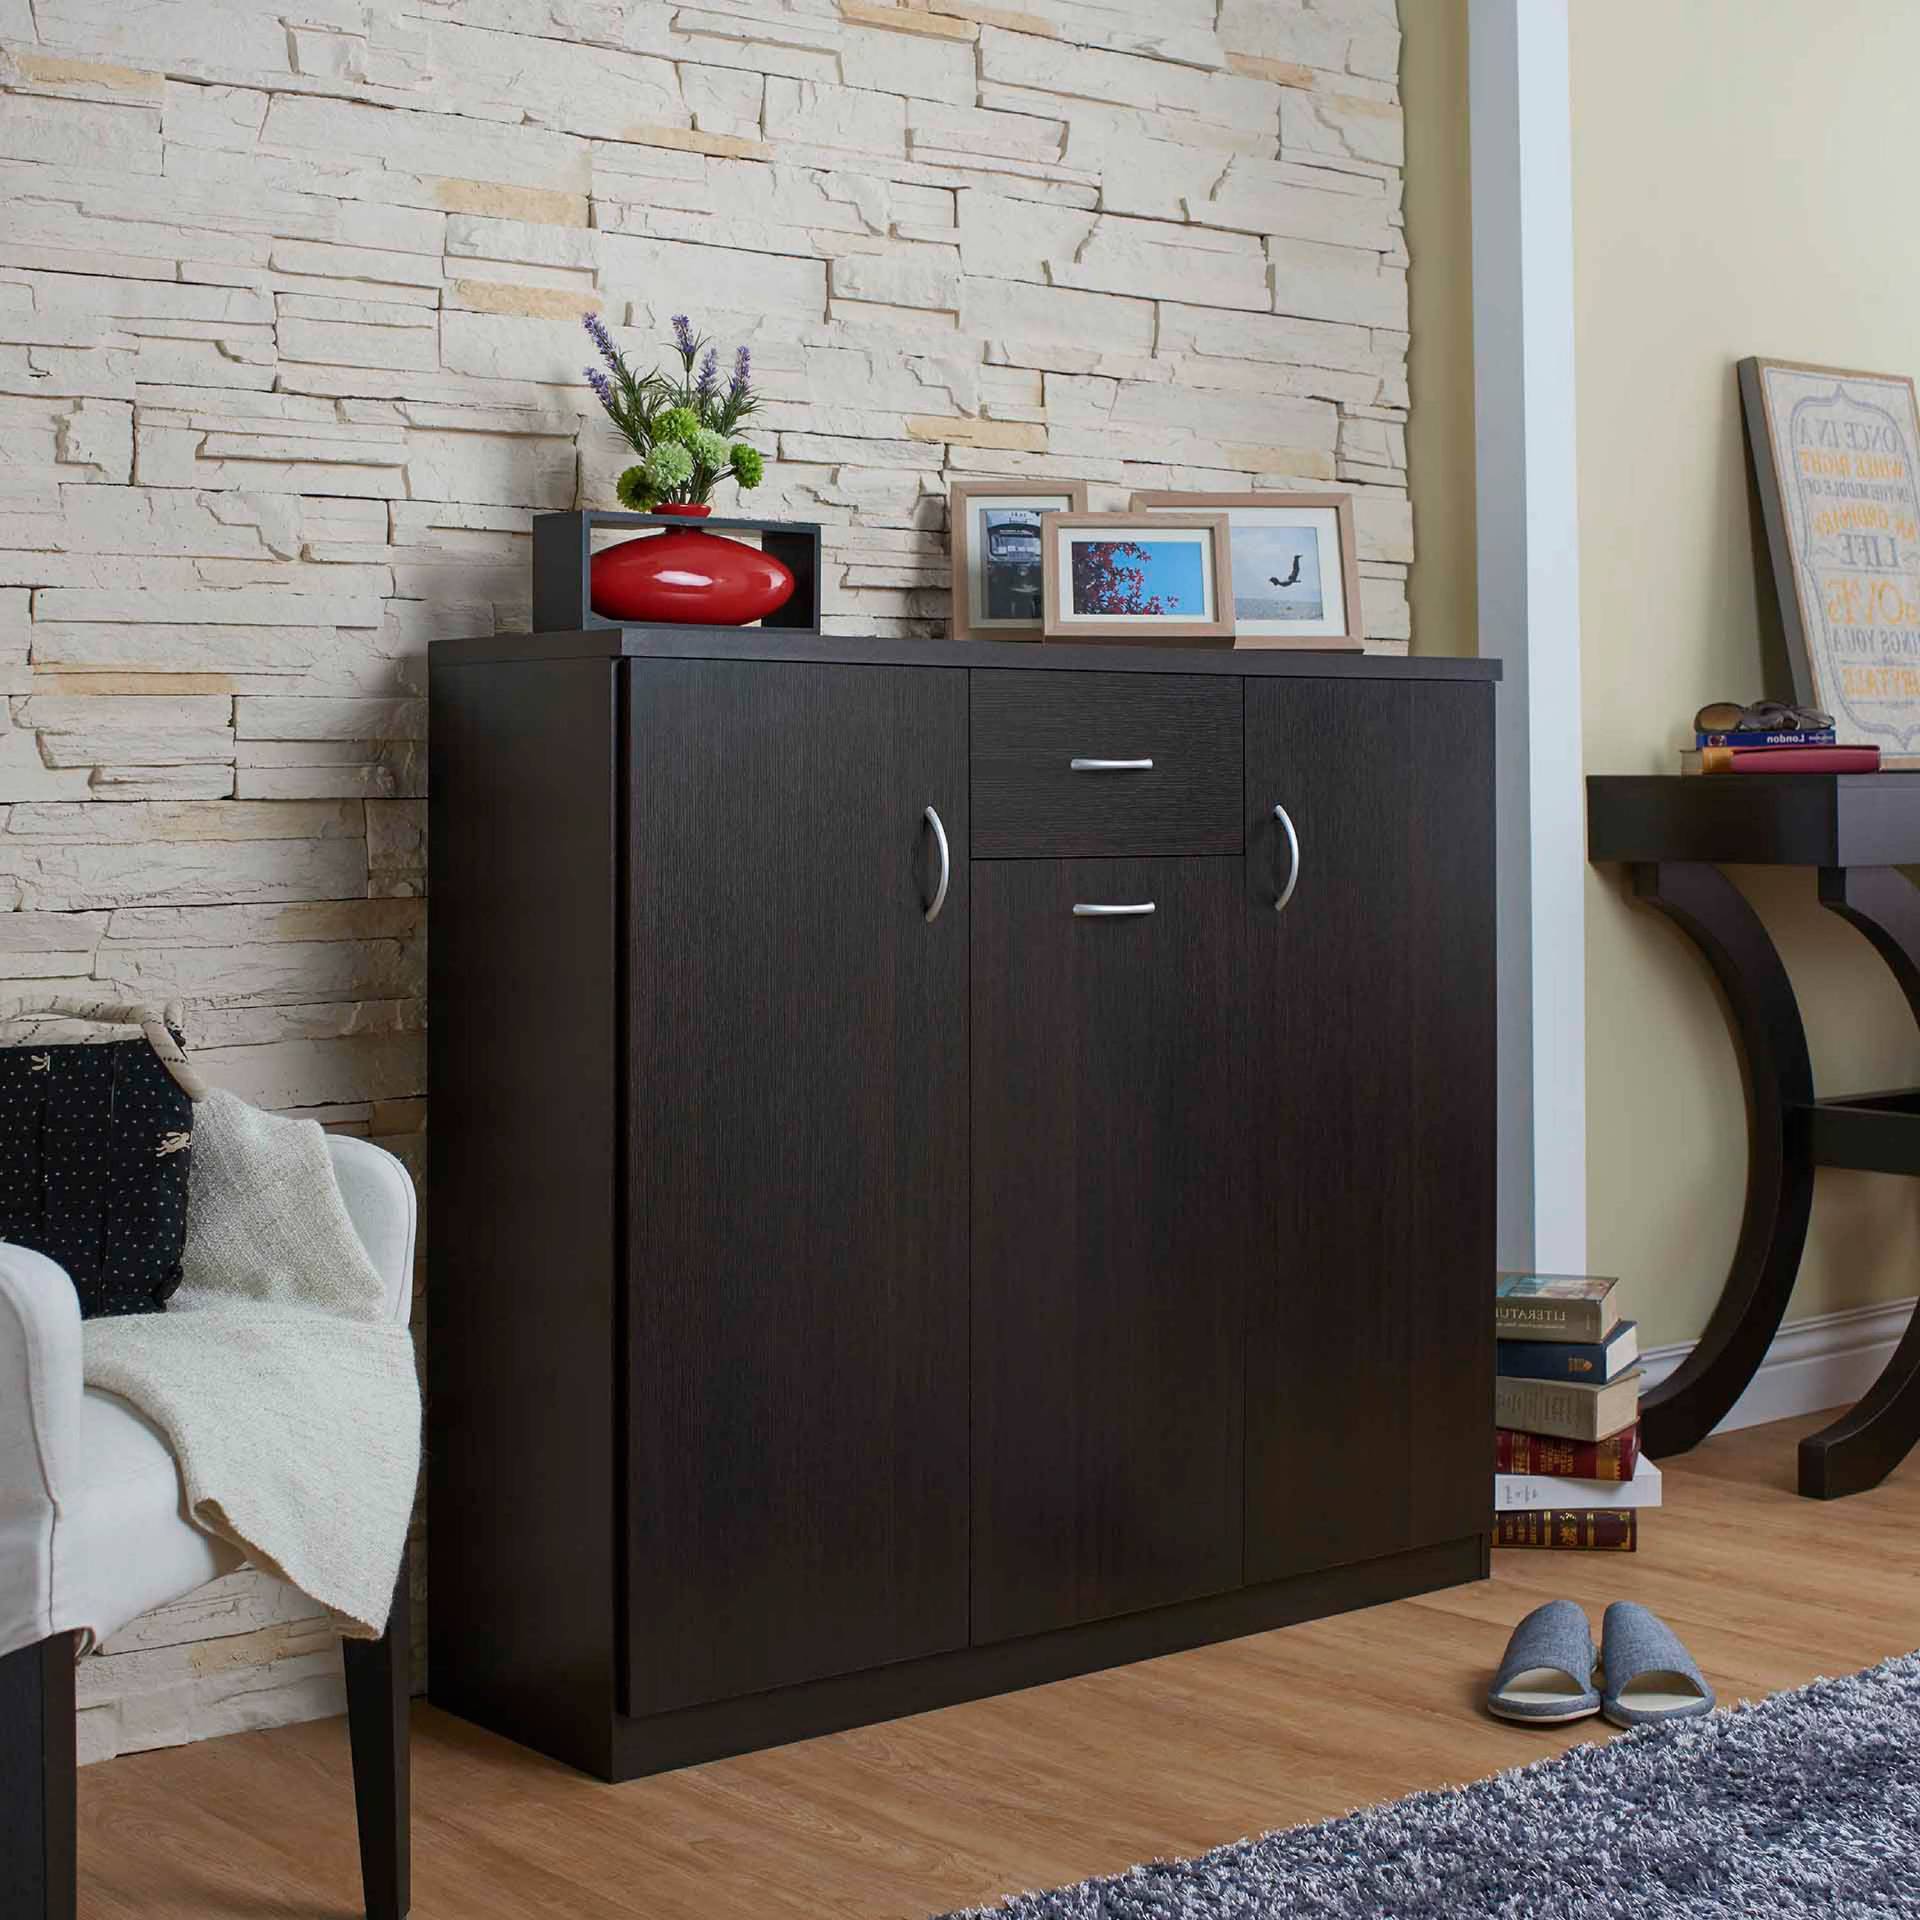 A drawer, laminated storage space, handle a special shape, entrance, dark brown